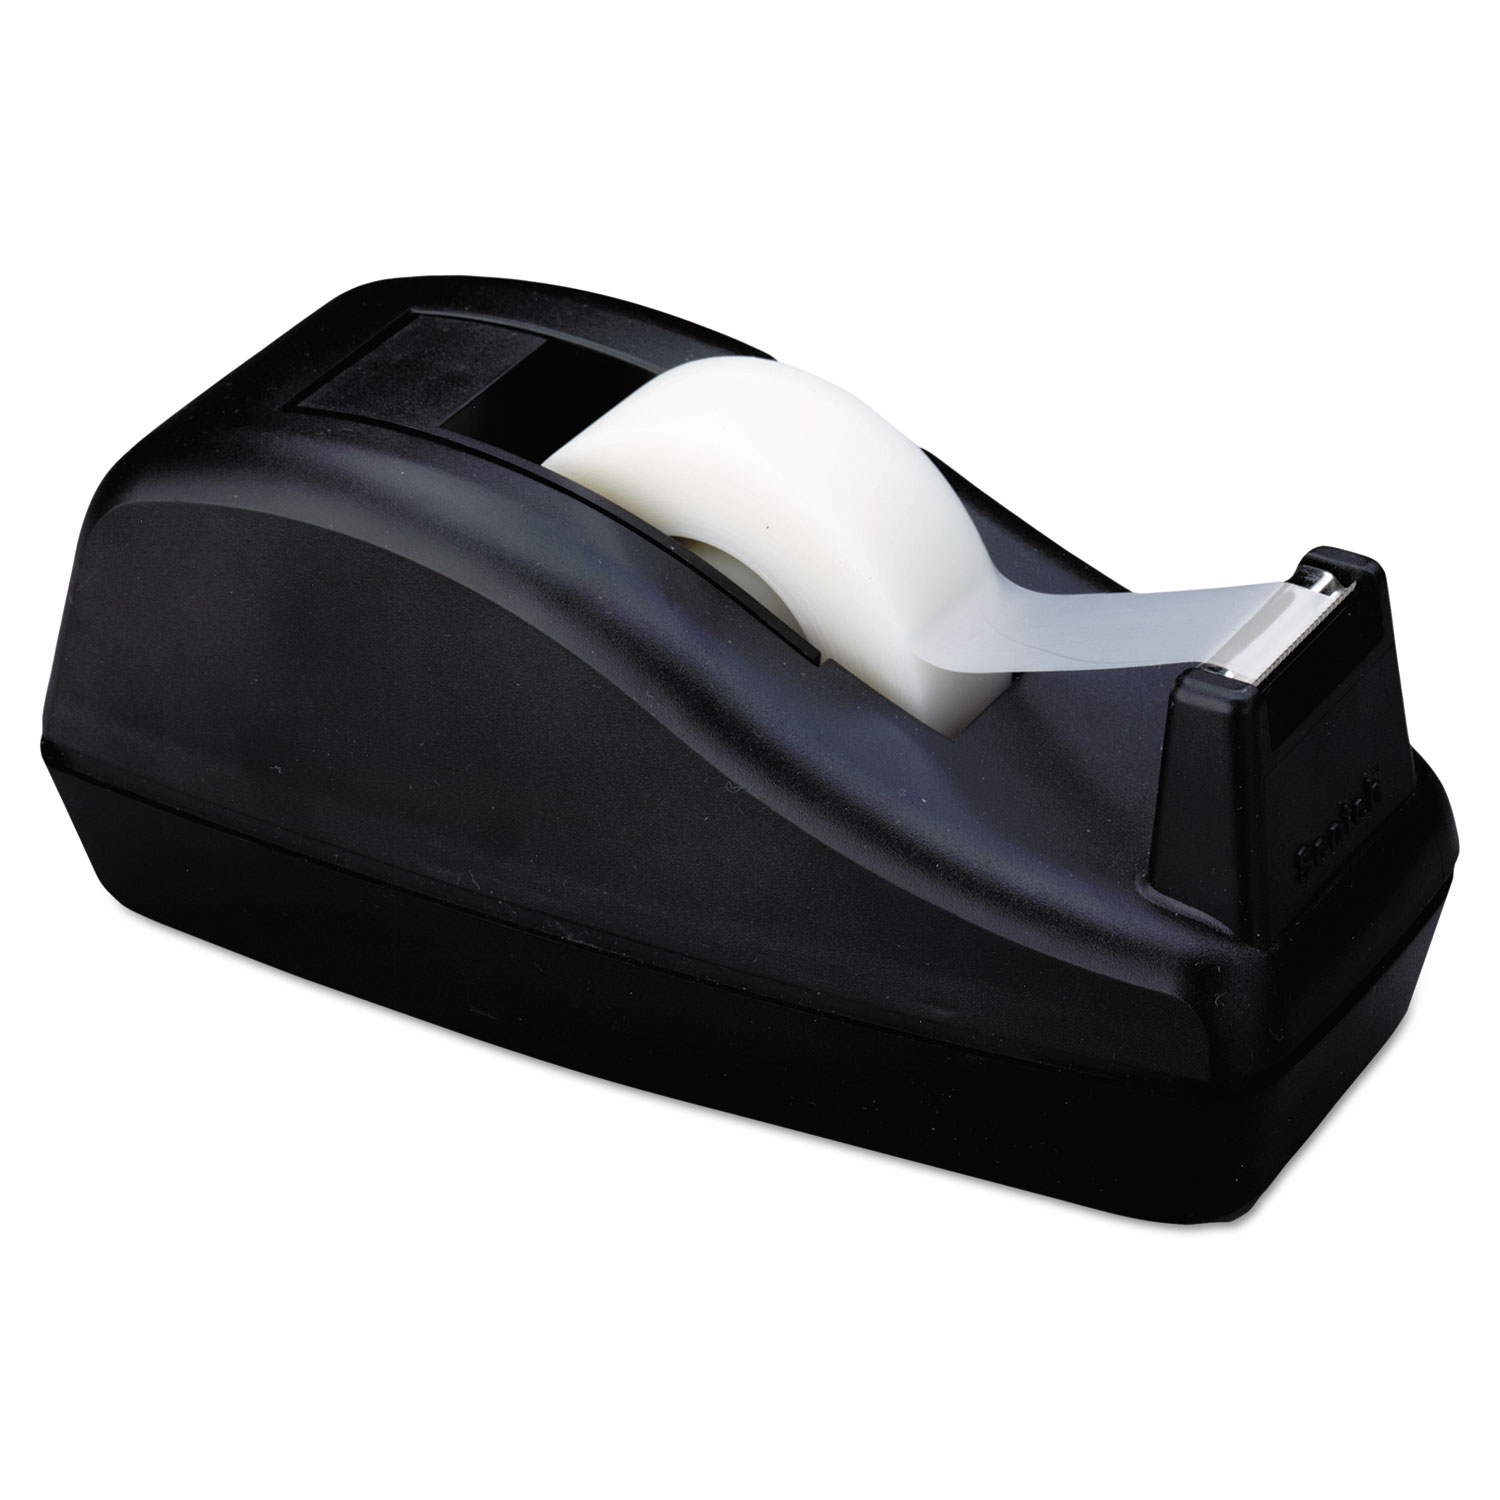  Scotch C-40 Deluxe Desktop Tape Dispenser, Attached 1 Core, Heavily Weighted, Black (MMMC40BK) 